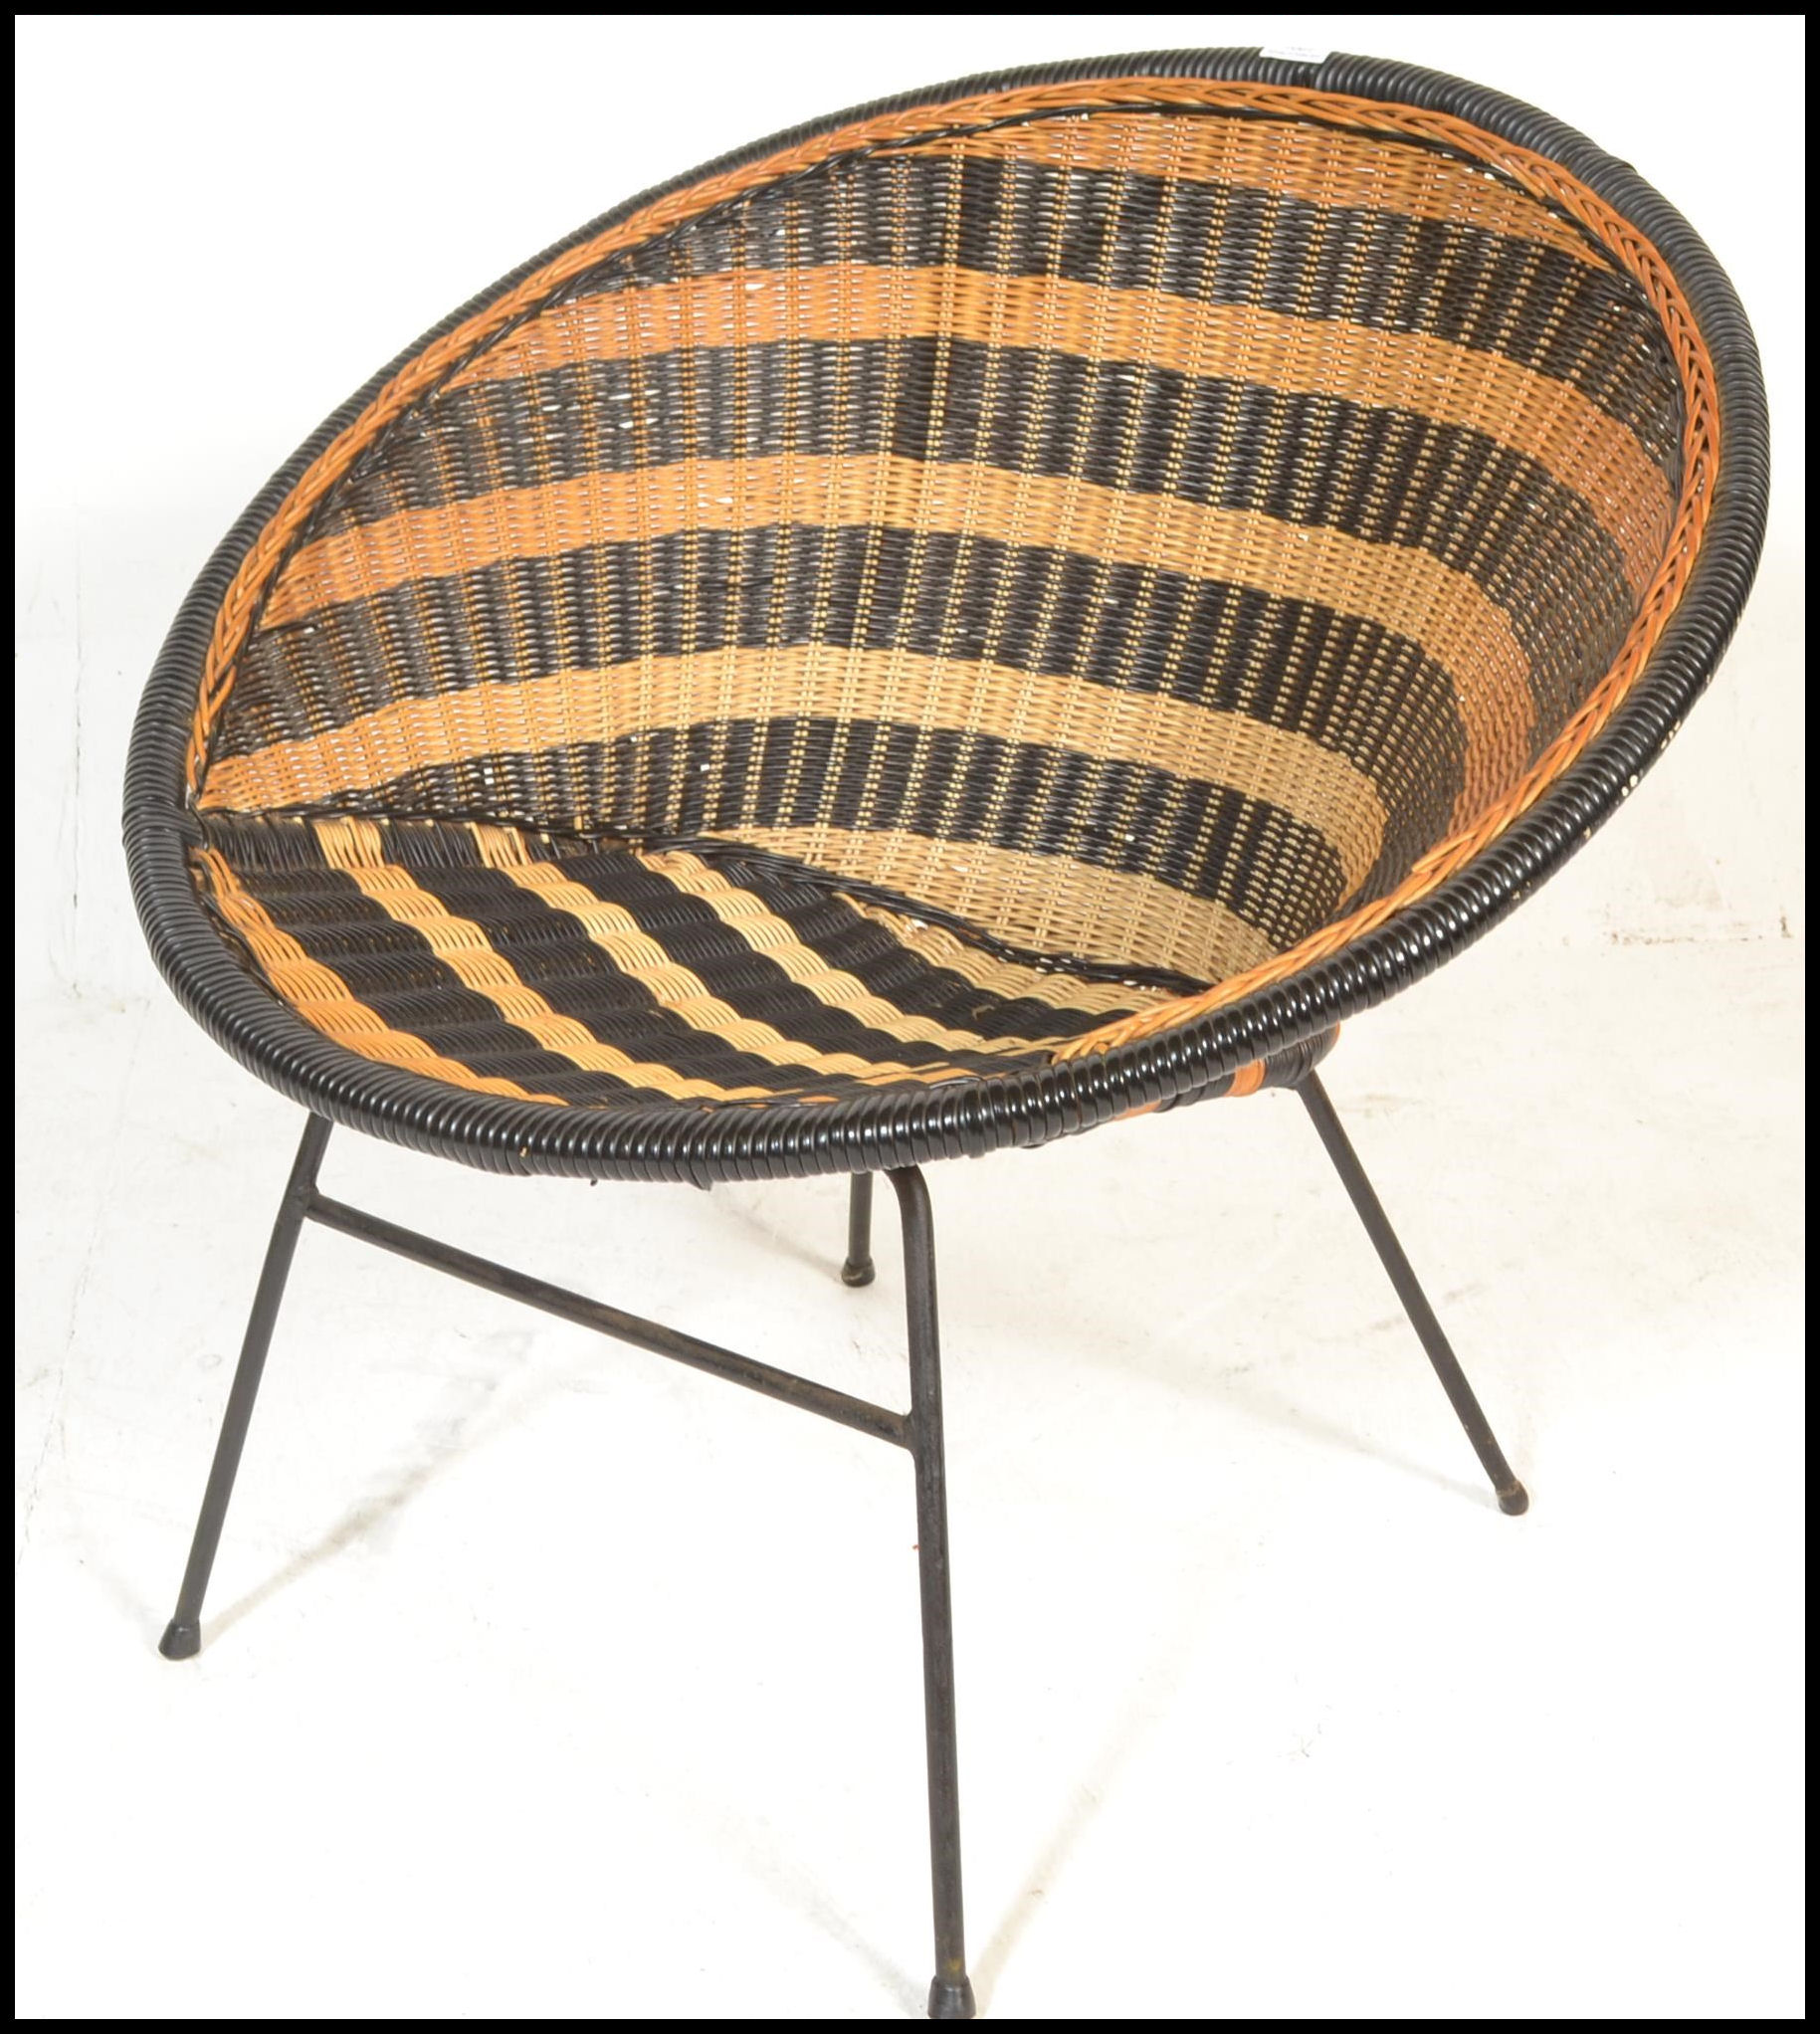 A mid century, circa 1950's satellite chair raised on tubular metal frame with two tone weave bucket